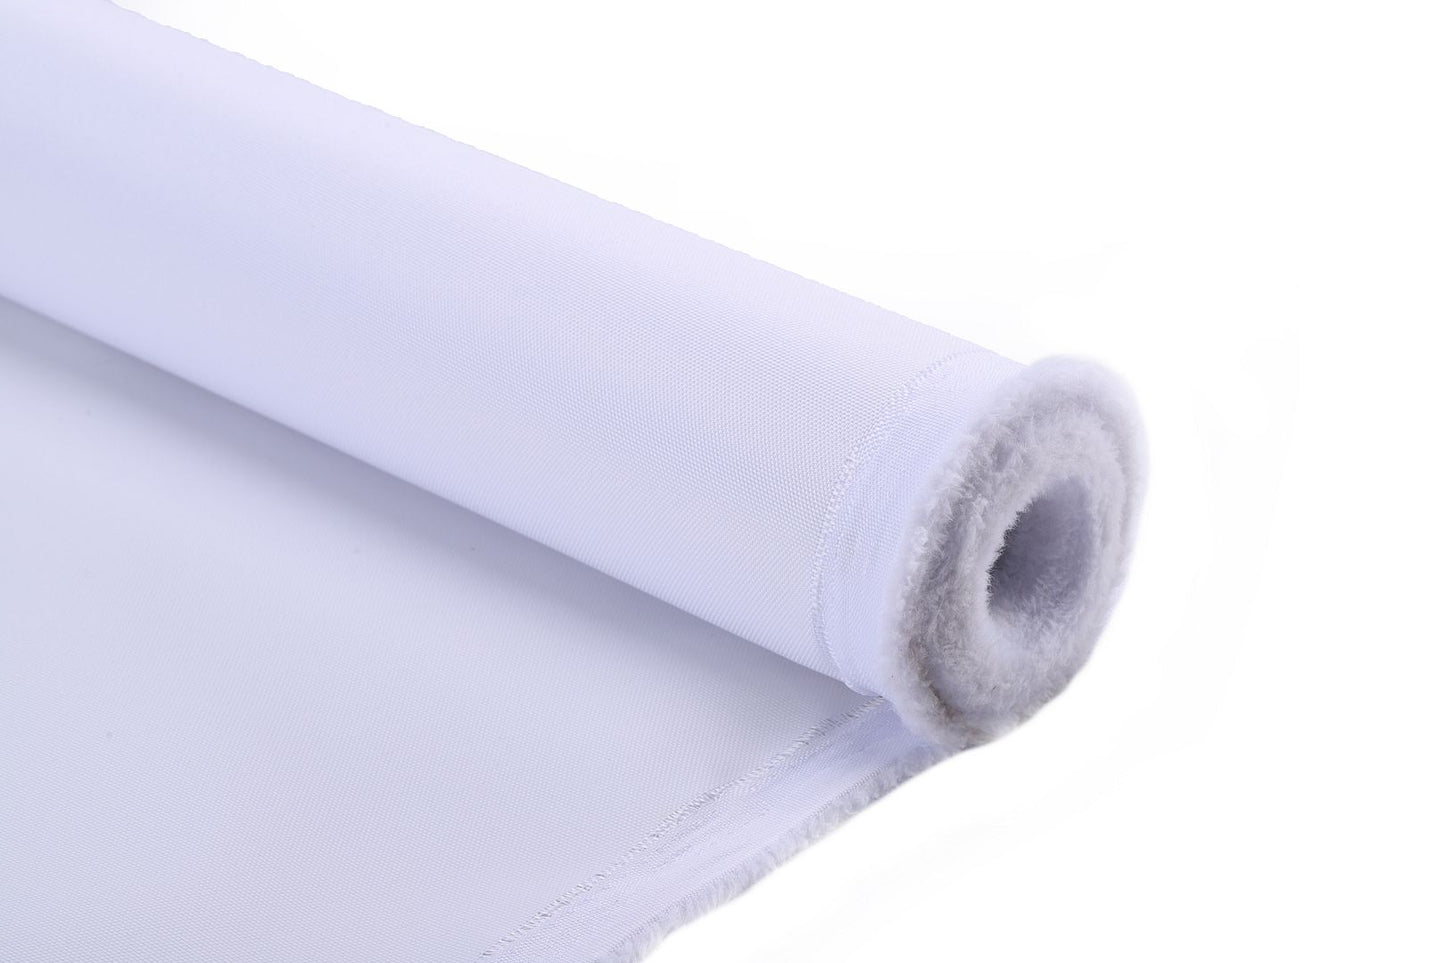 Waterproof canvas awning fabric marine outdoor - solid white